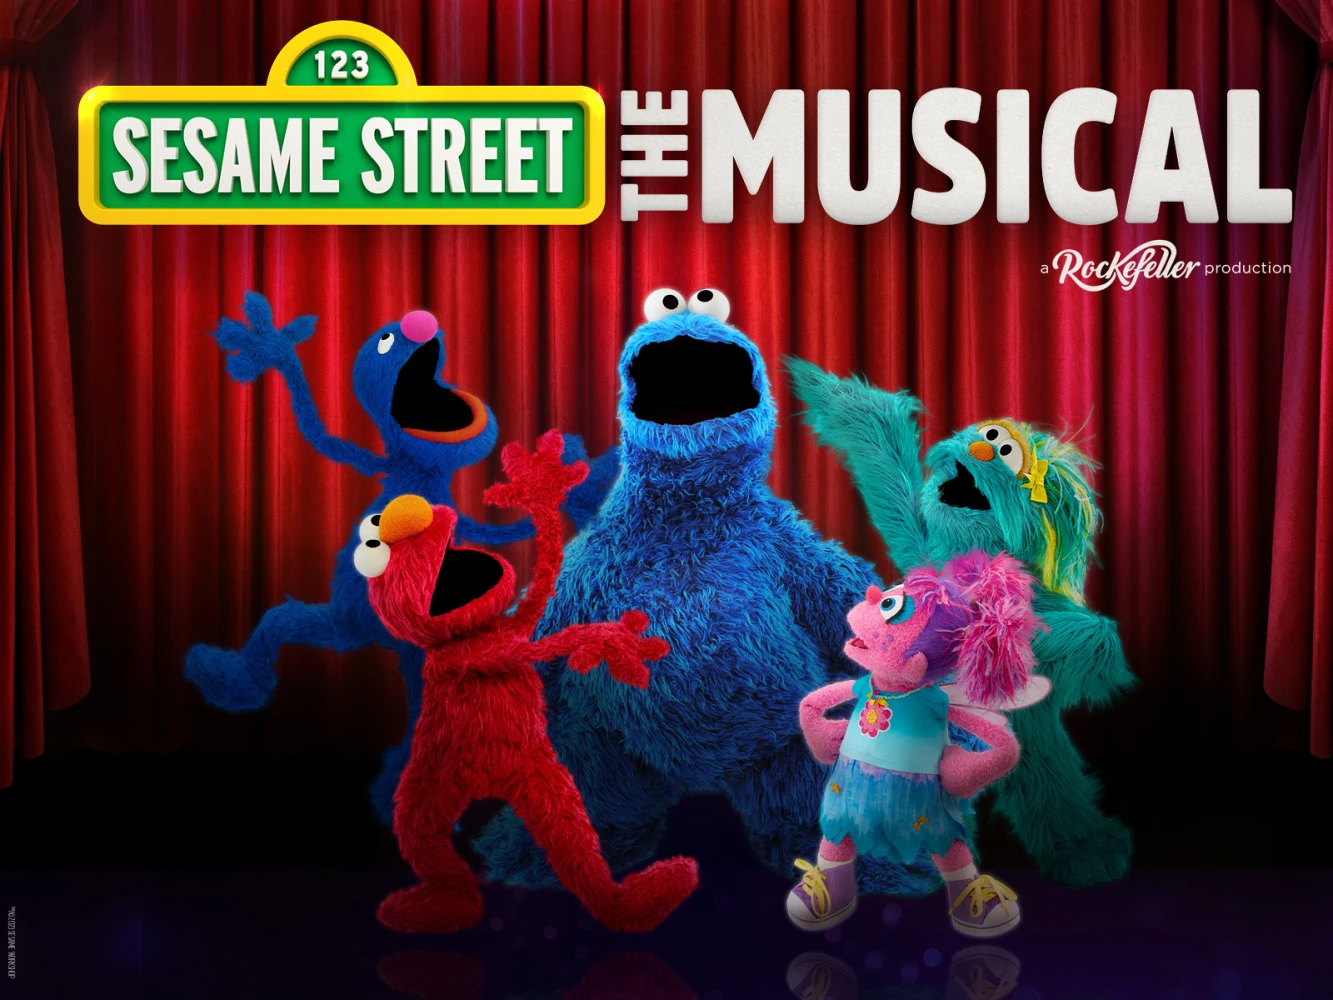 Sesame Street the Musical: What to expect - 9